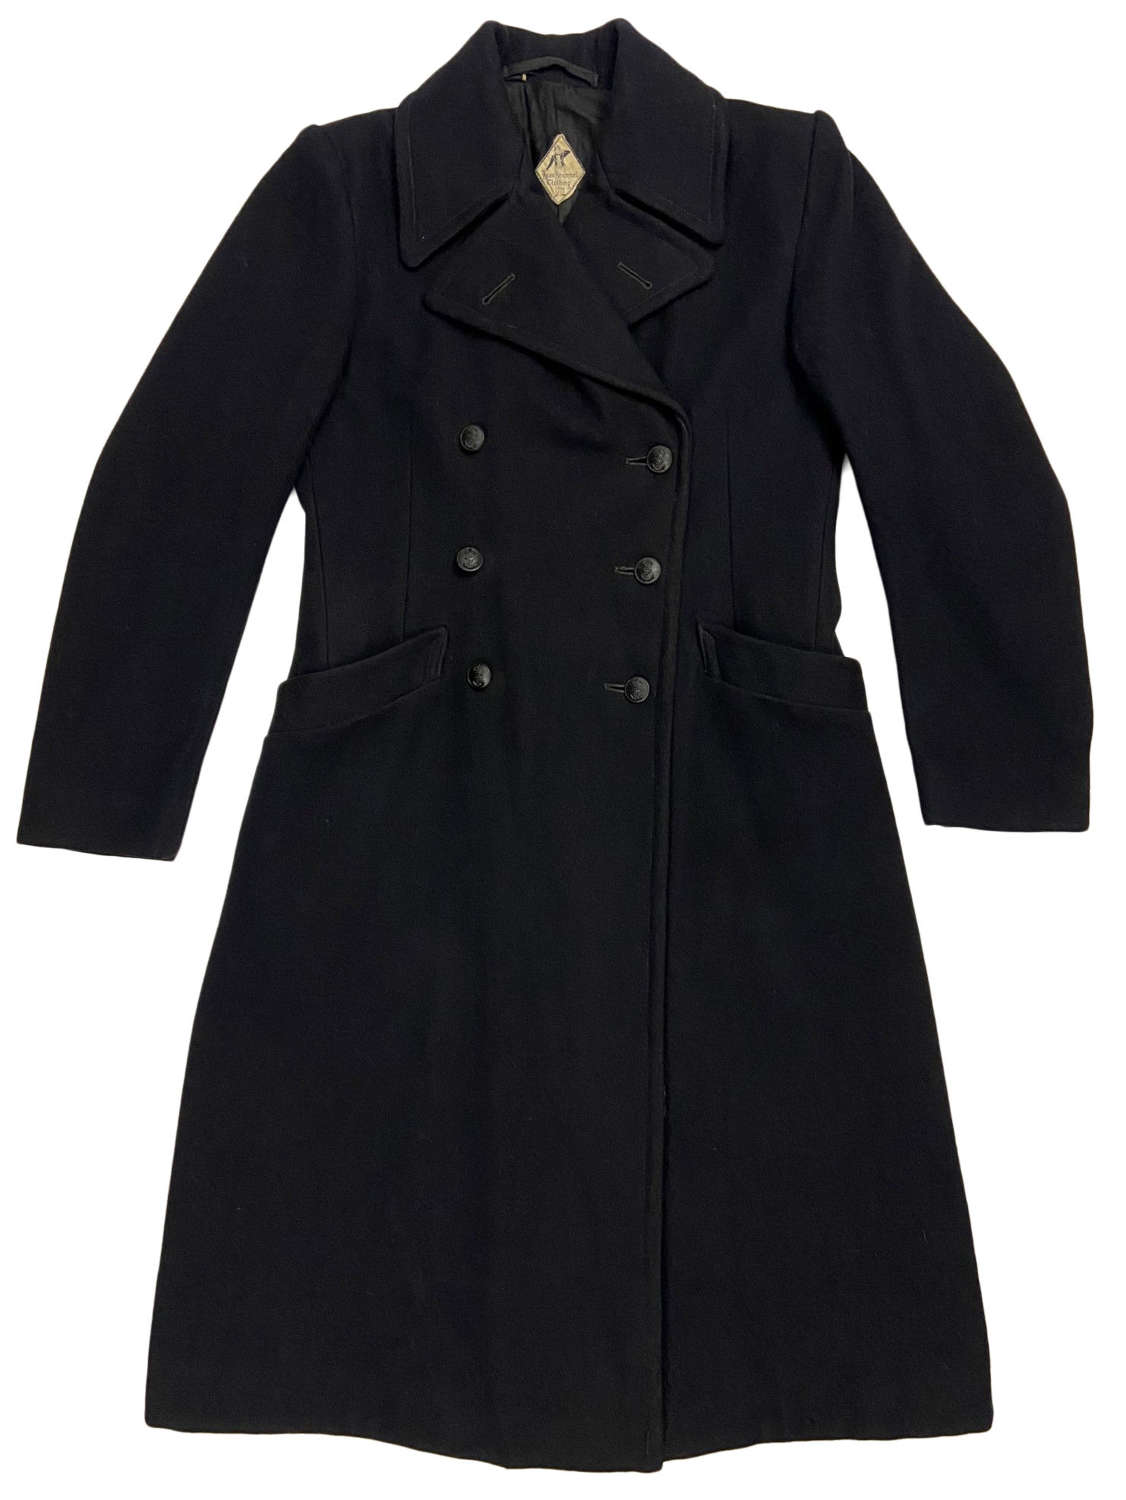 Scarce Original 1945 Dated WRNS Greatcoat - Size 5